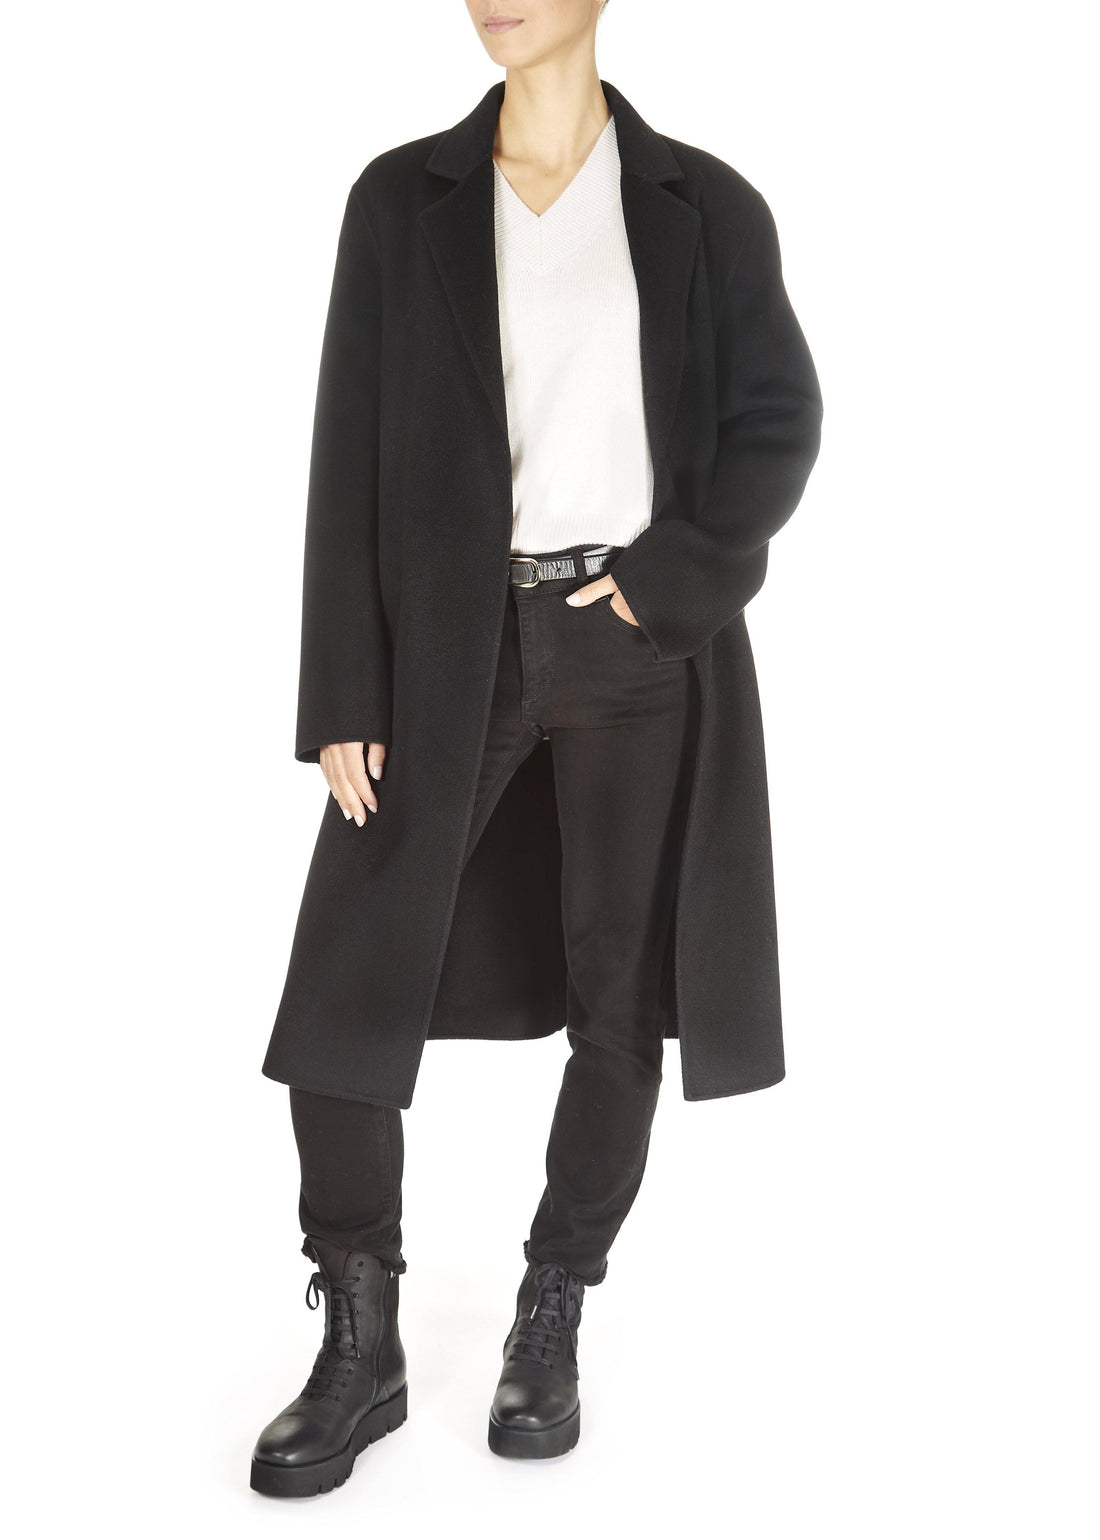 Intuition Paris Trench Coat with Fur Trim 38 - Sold Out